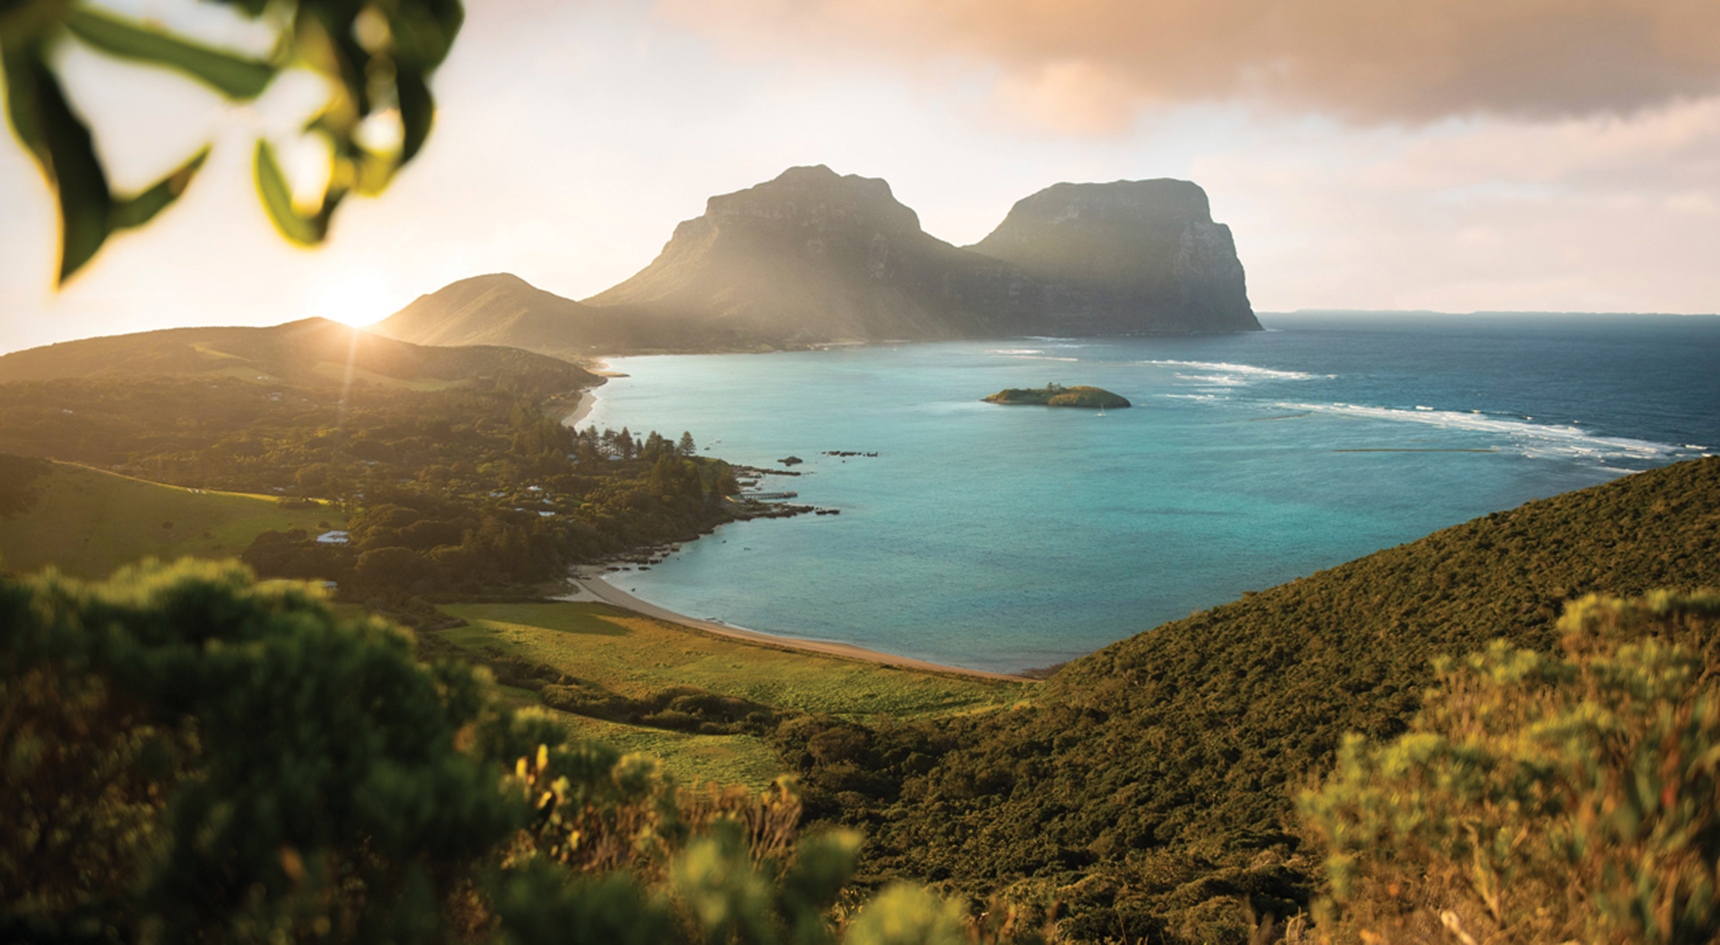 View of Mount Lidgbird and Mount Gower, Lord Howe Island, NSW.